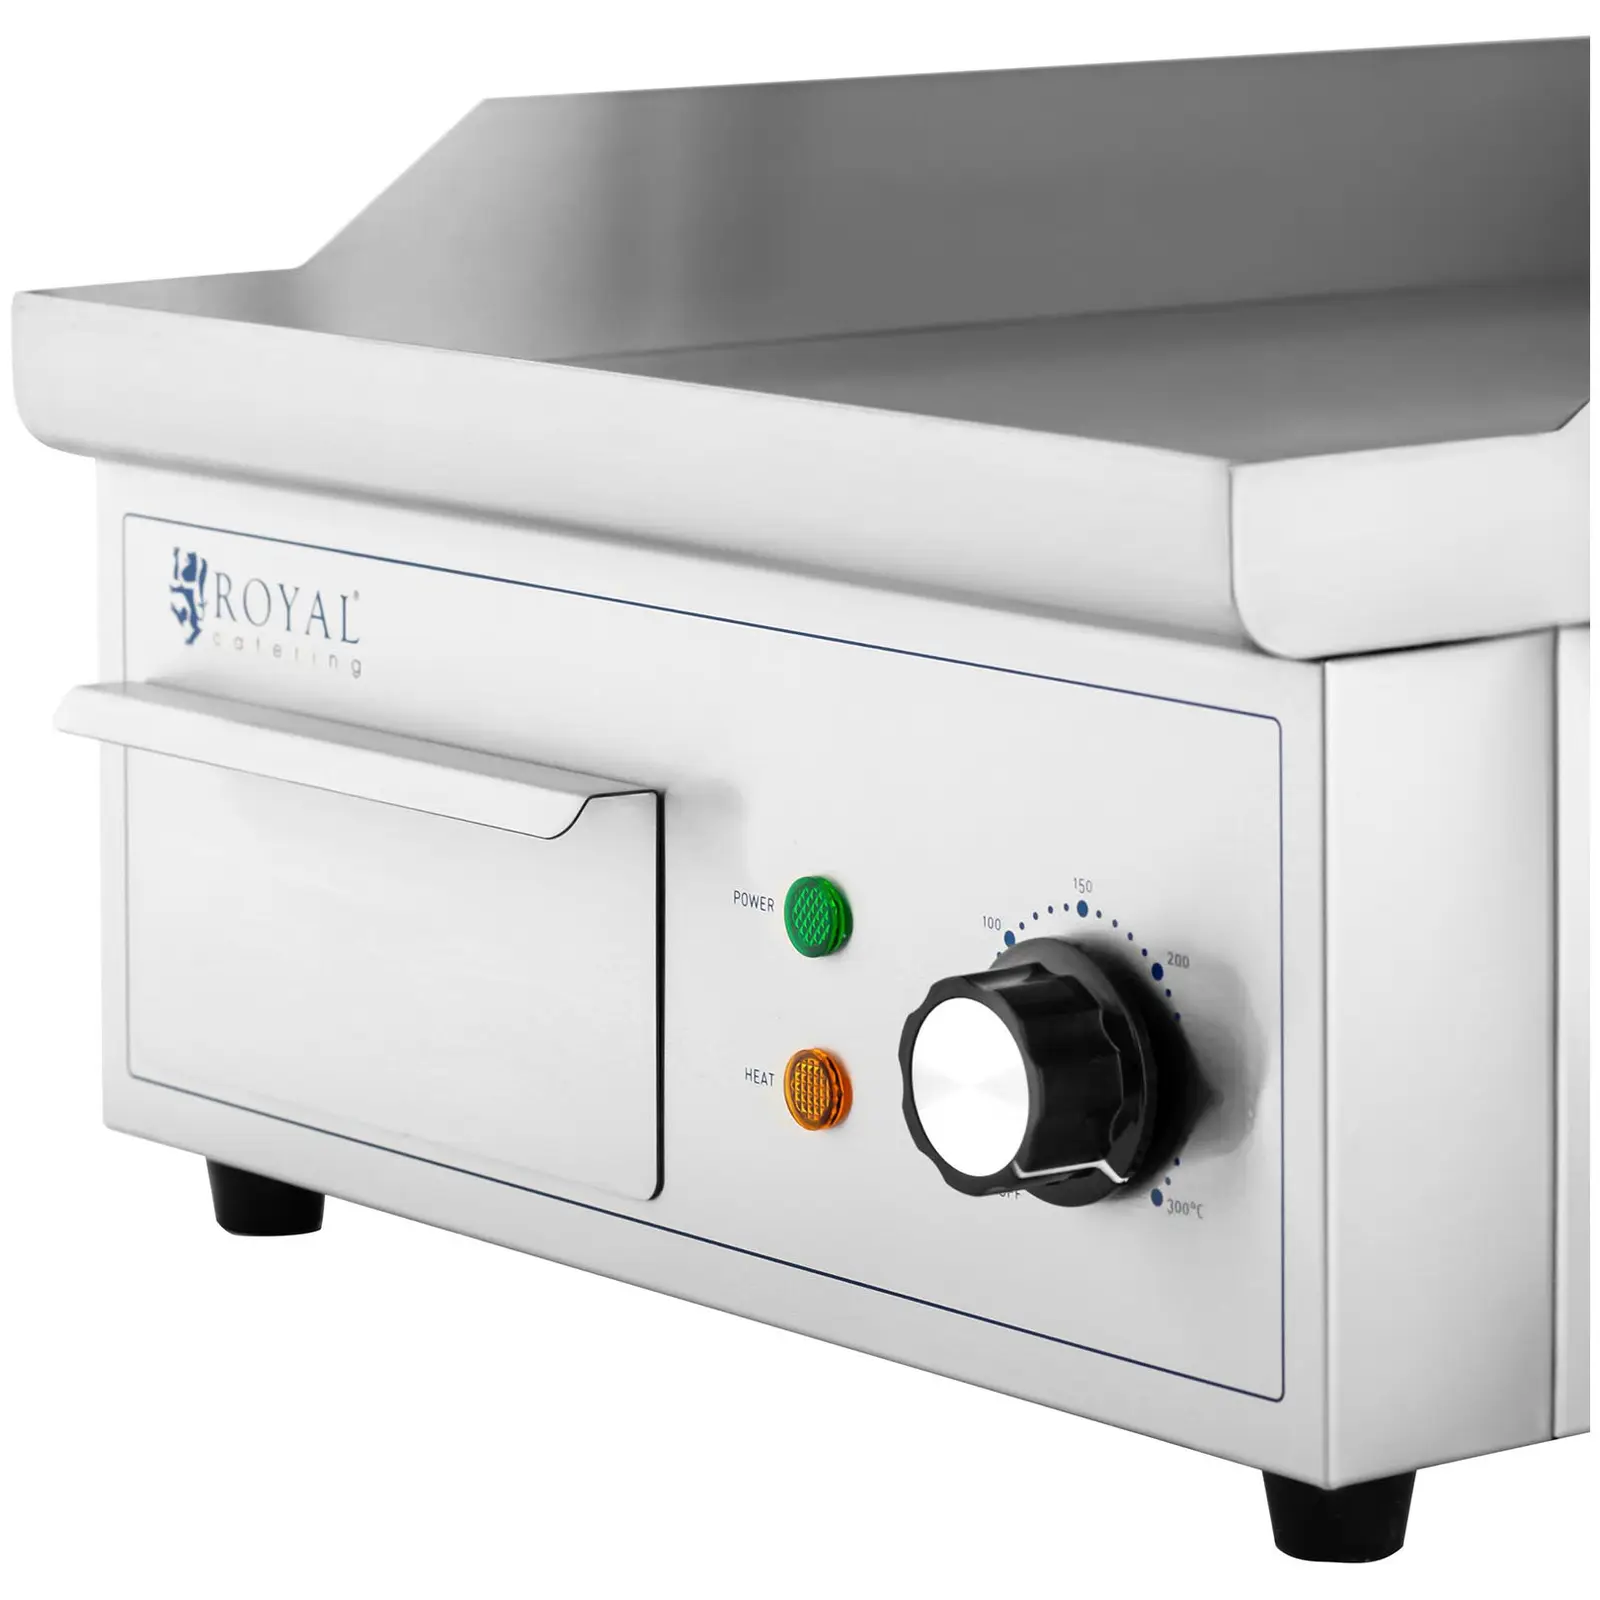 Fry top elettrico - 350 x 380 mm - Royal Catering - Piastra liscia - 2000 W